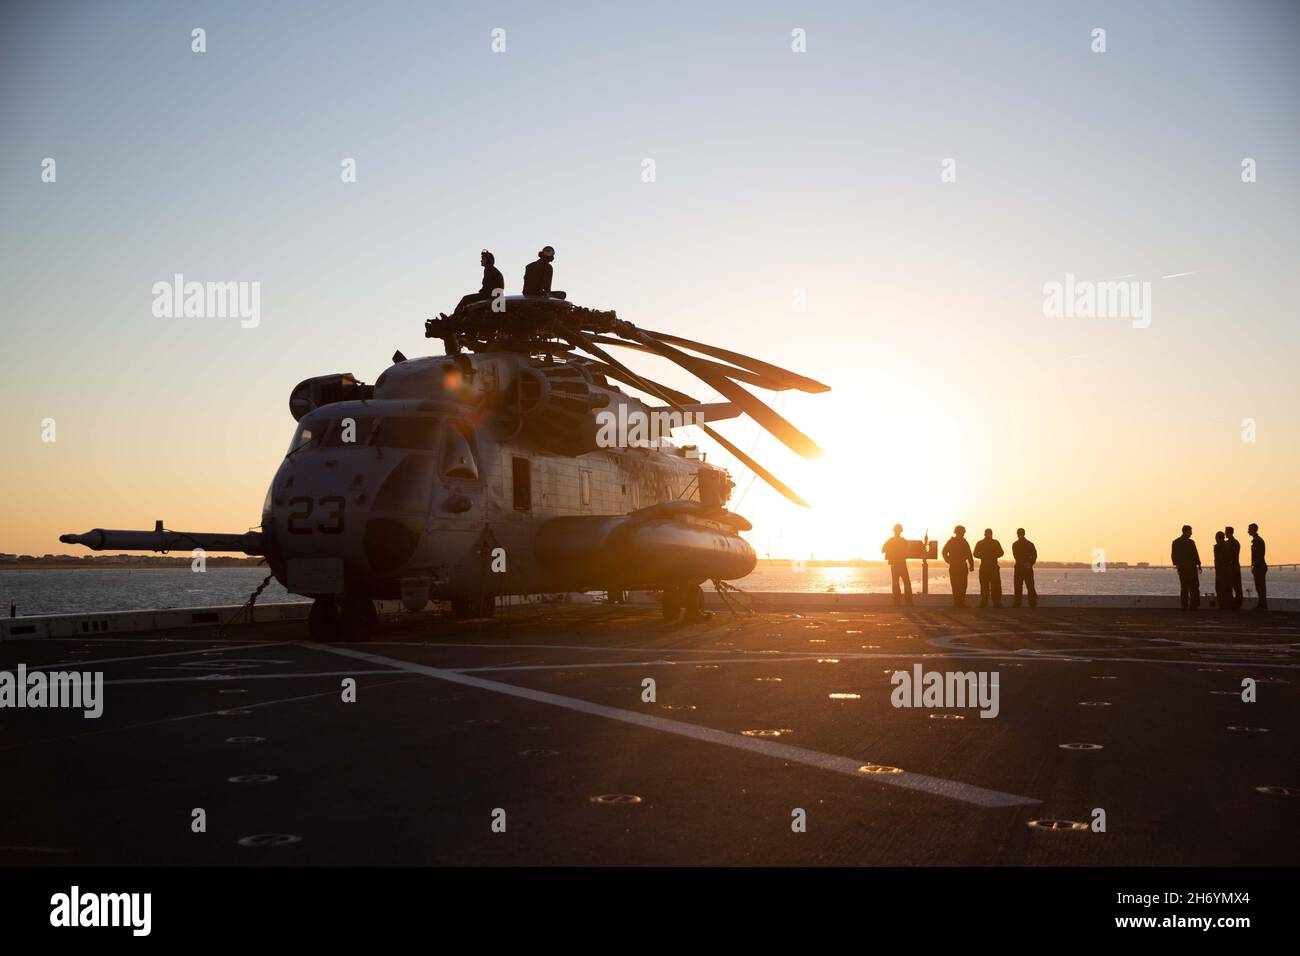 North Carolina, USA. 20th Oct, 2021. U.S. Marines with the 22nd Marine Expeditionary Unit (MEU) gather on the flight deck of the USS Arlington (LPD-24) after coming on board in Morehead City, North Carolina, Oct. 20, 2021. The Marines joined the crew of the Arlington for PHIBRON''“MEU Integrated training (PMINT) in preparation for an upcoming deployment. PMINT is the first at-sea period in the MEUs Predeployment Training Program; it aims to increase interoperability and build relationships between Marines and Sailors. Credit: U.S. Marines/ZUMA Press Wire Service/ZUMAPRESS.com/Alamy Live News Stock Photo